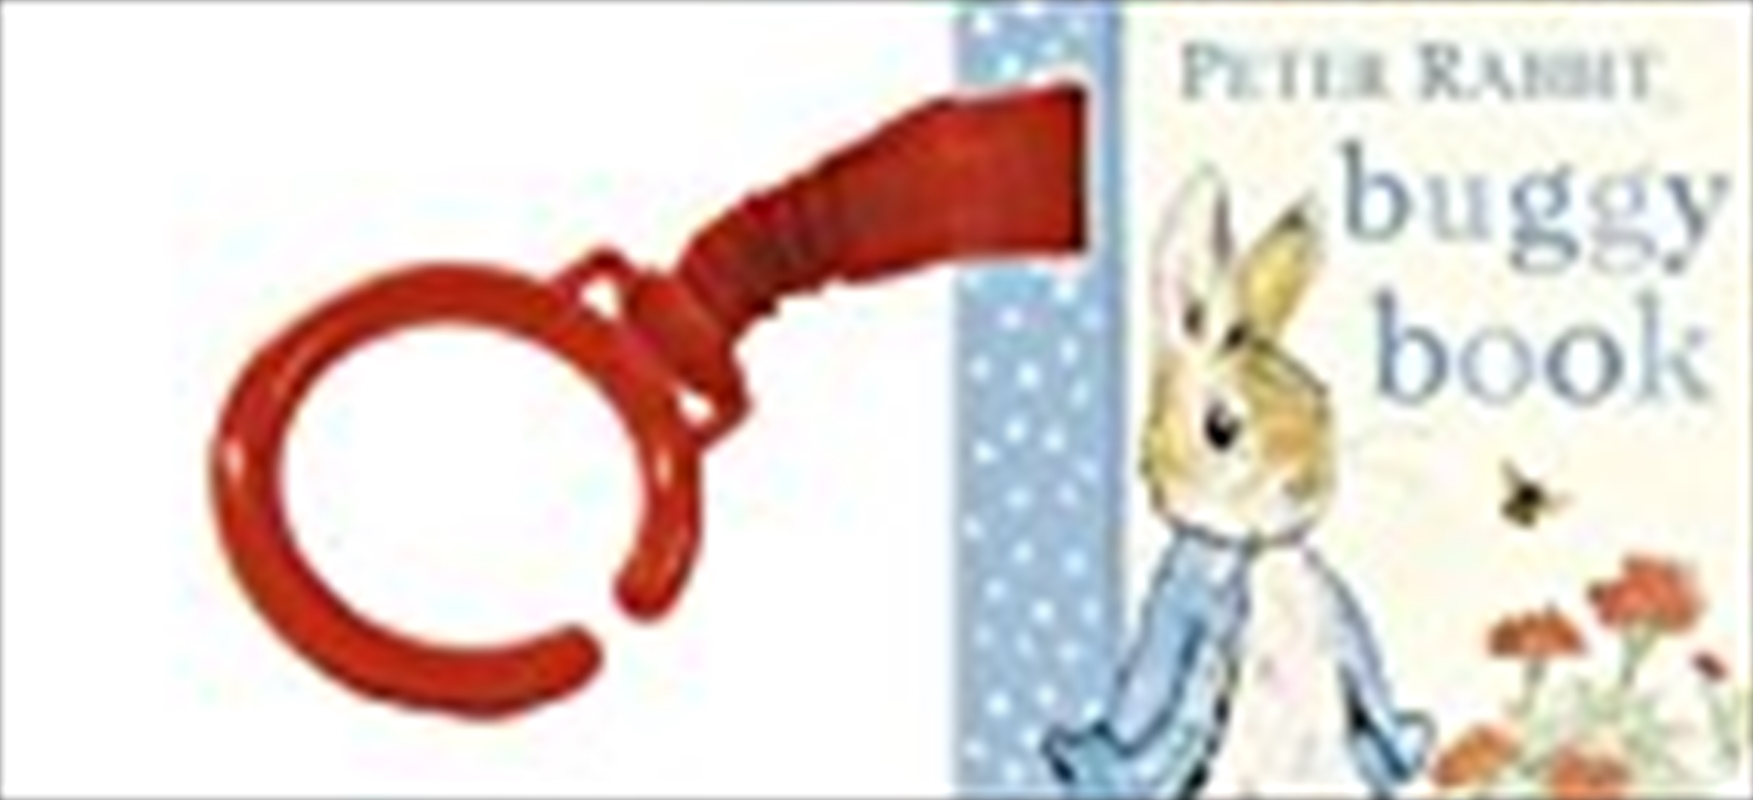 Peter Rabbit: Buggy Book/Product Detail/Early Childhood Fiction Books